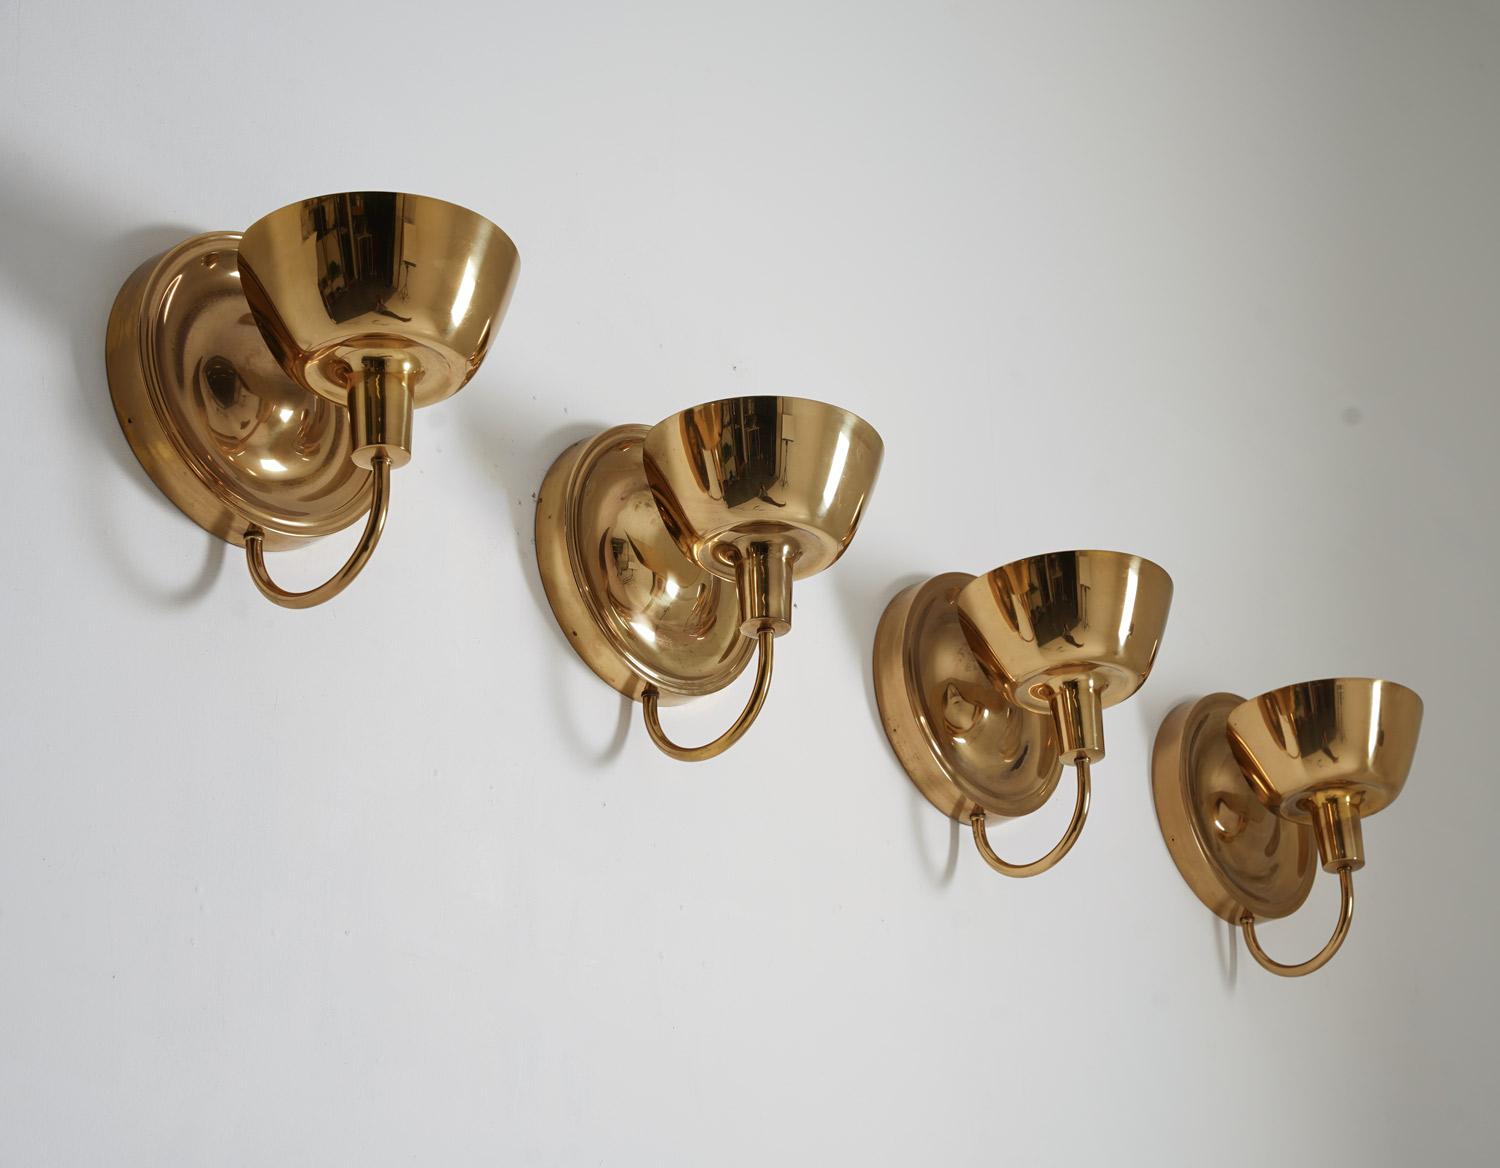 Stunning wall sconces model 2389 by Josef Frank for Svenskt Tenn. The lamps give a soft secondary light as the reflectors lighten up the brass back plate.

Condition: Very good original condition with a soft patina. Some imperfections such as light